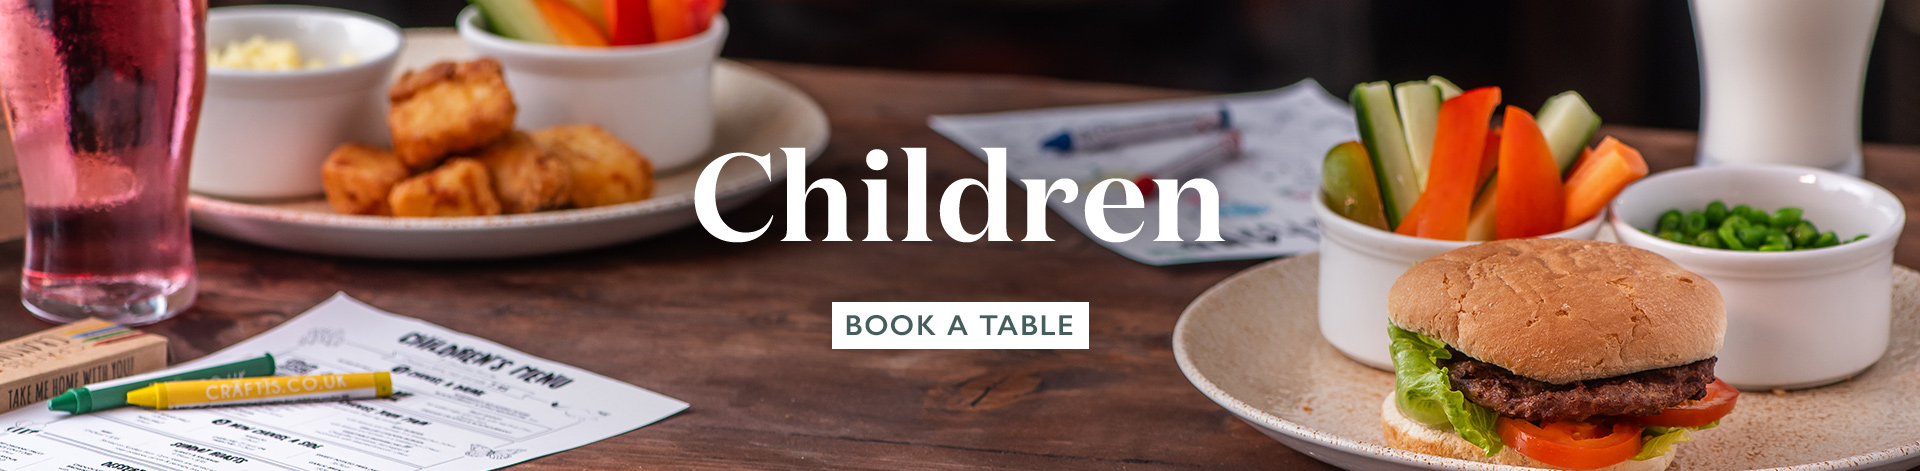 Children's Menu at The Baker's Arms